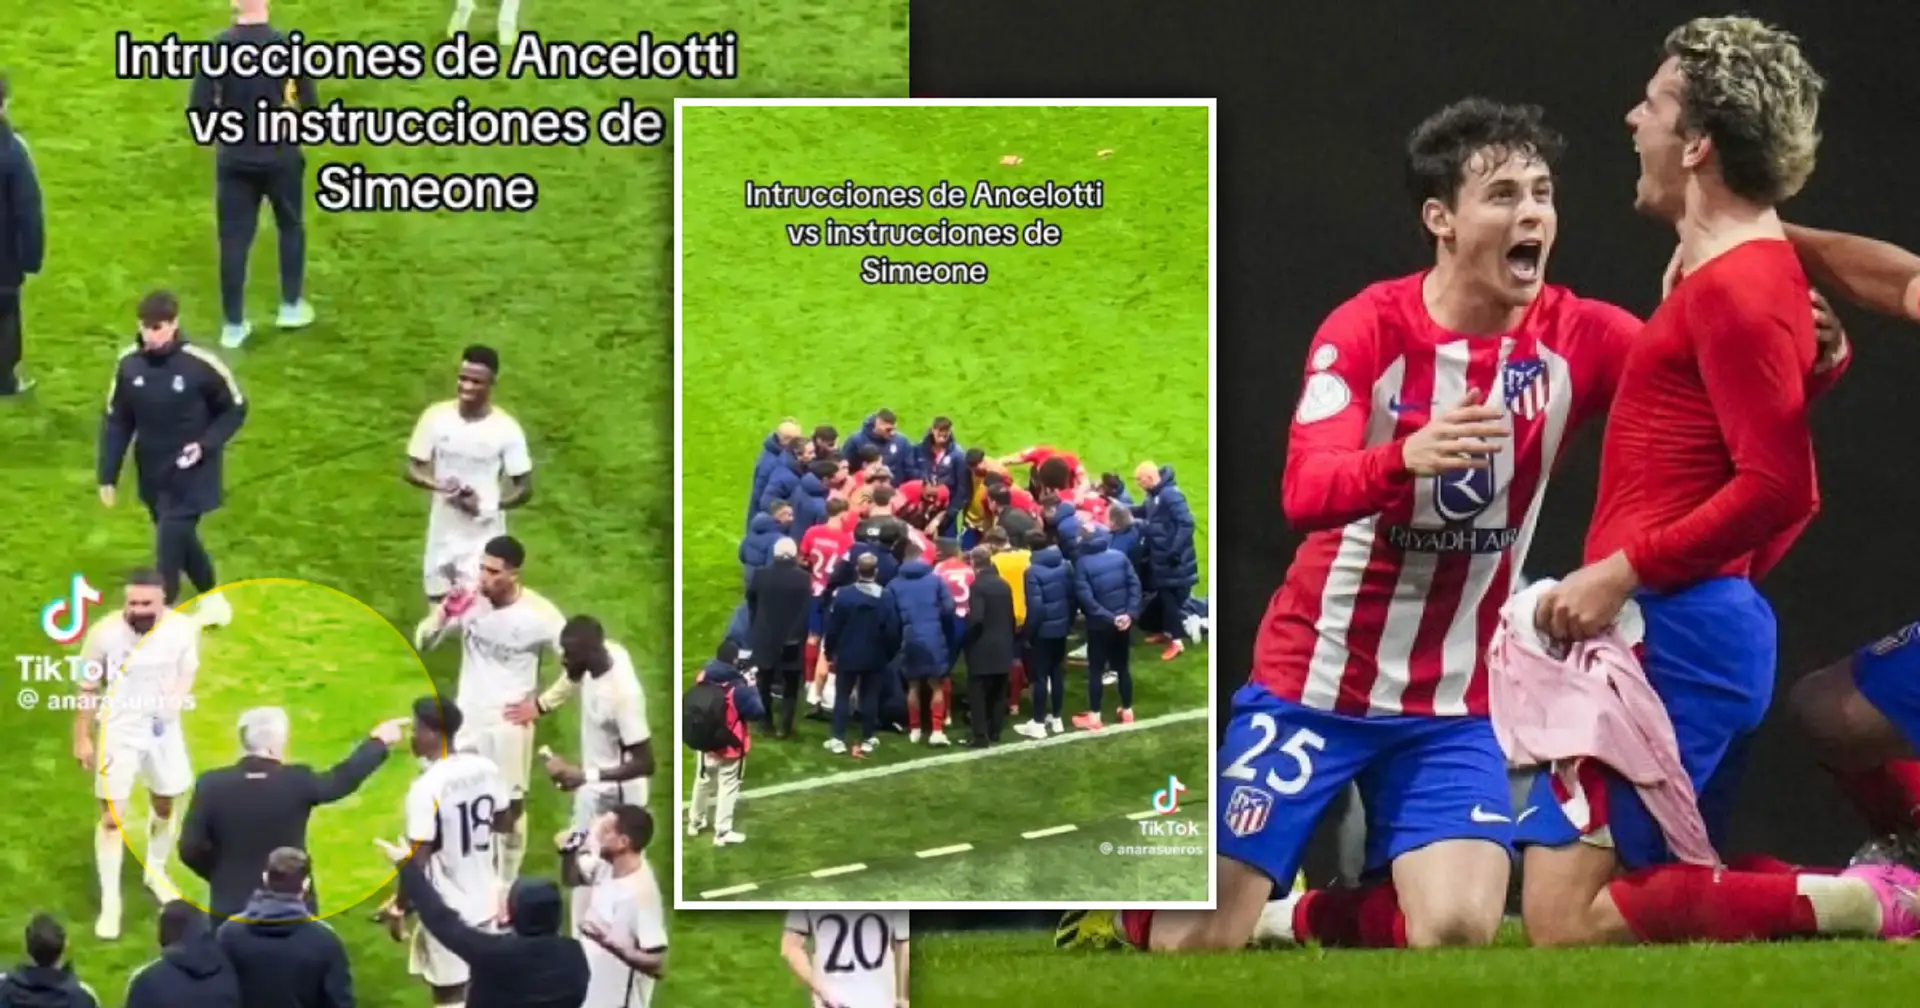 One episode in Copa del Rey clash has Atletico fans celebrating like they won the trophy 